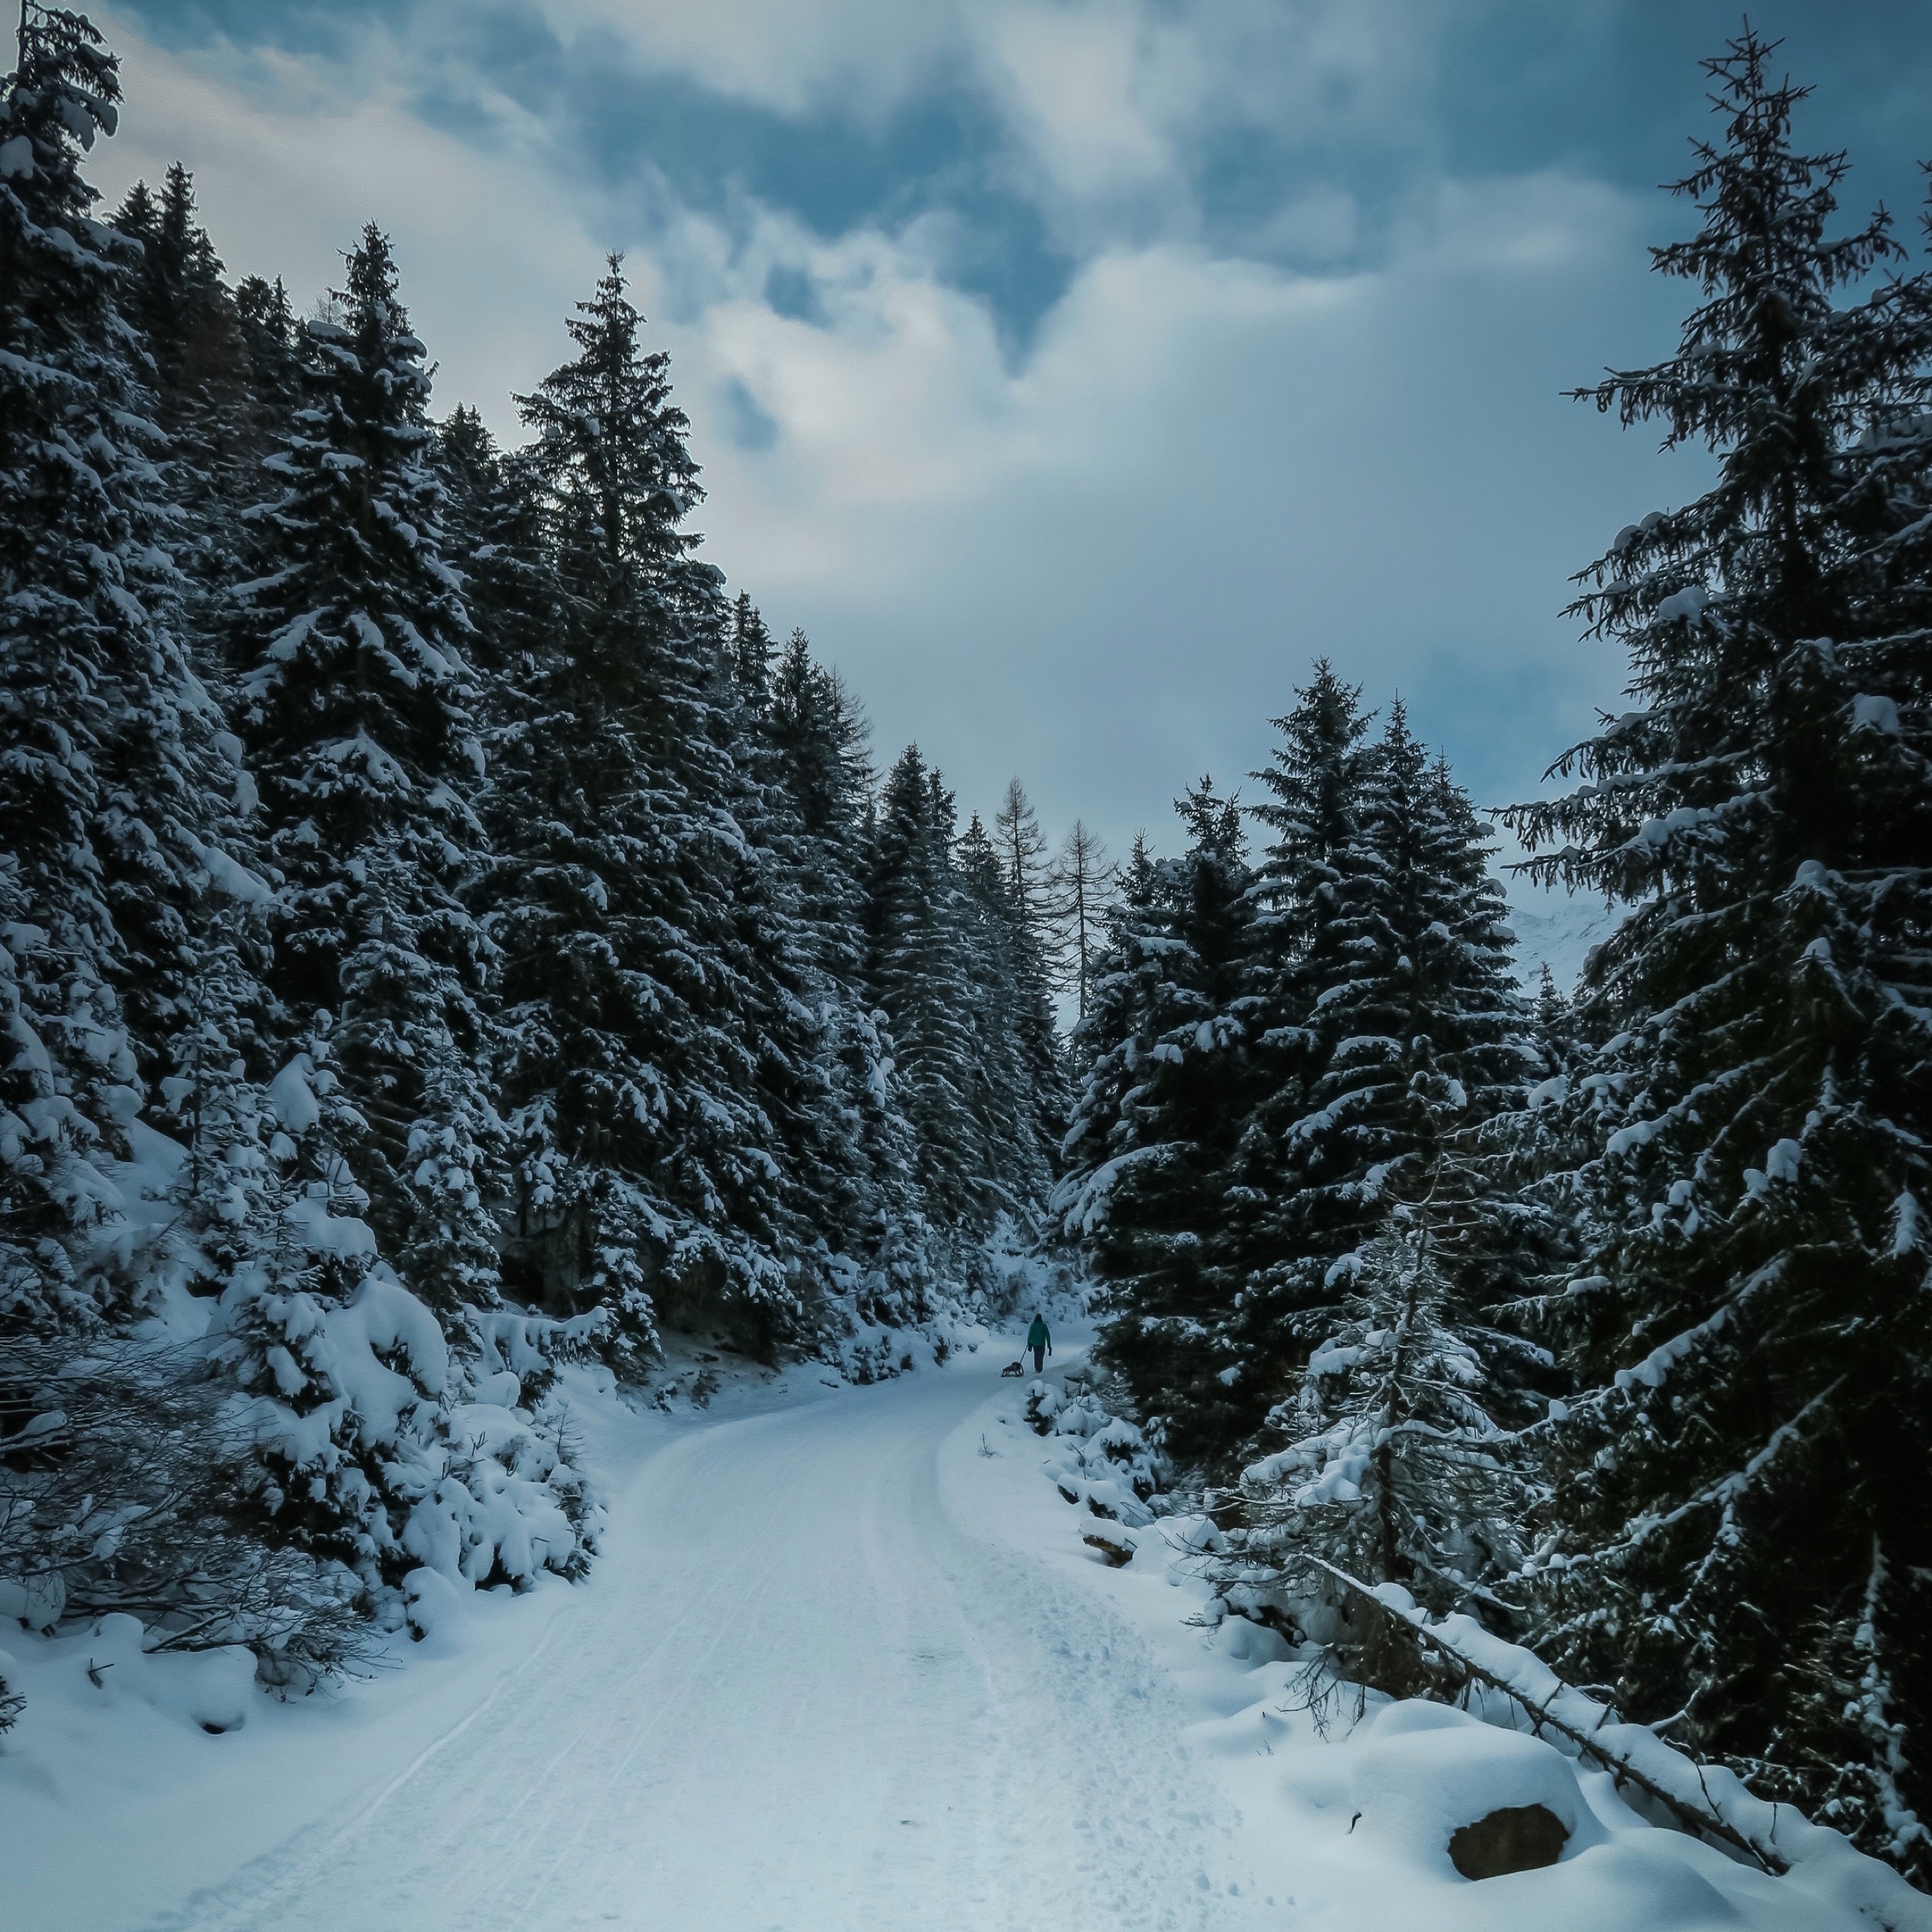 Wallpaper Weekends: Winter Wonderland Wallpapers for iPhone and iPad